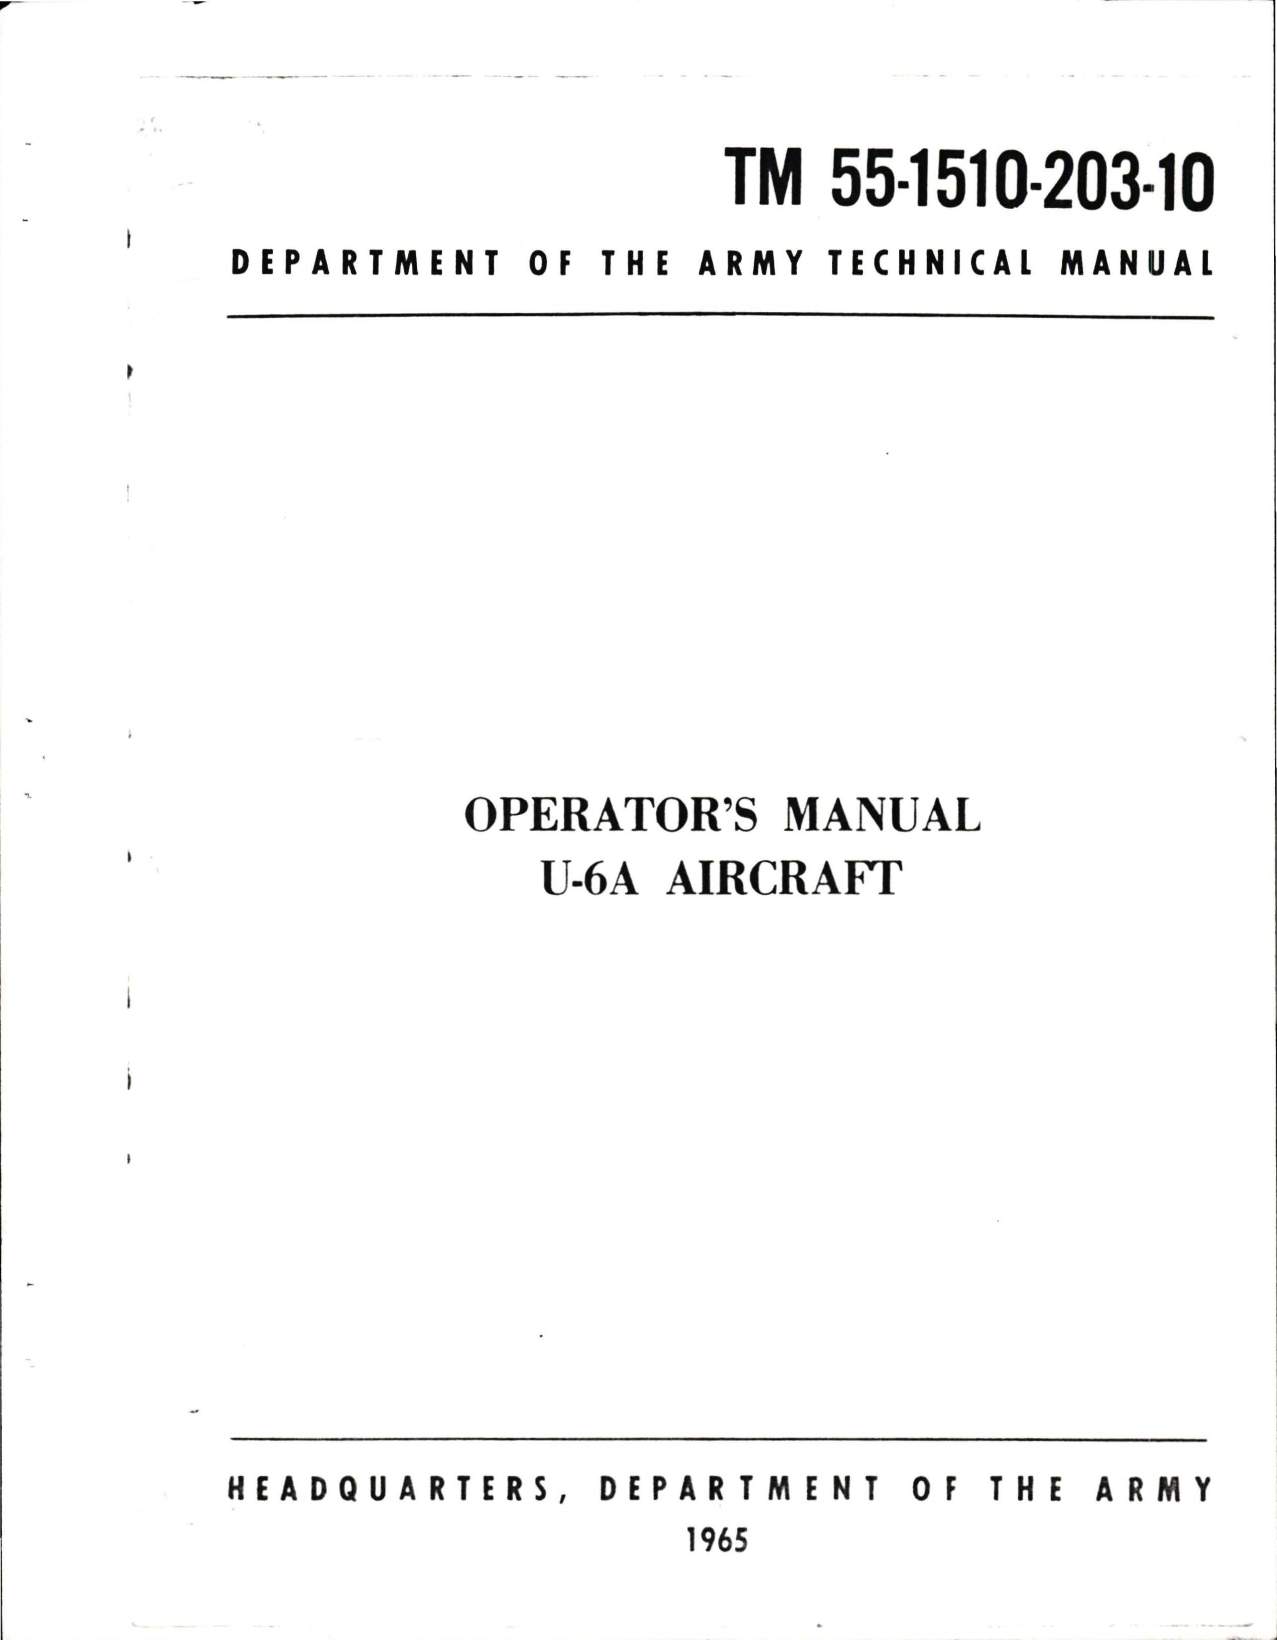 Sample page 1 from AirCorps Library document: Operator's Manual for U-6A